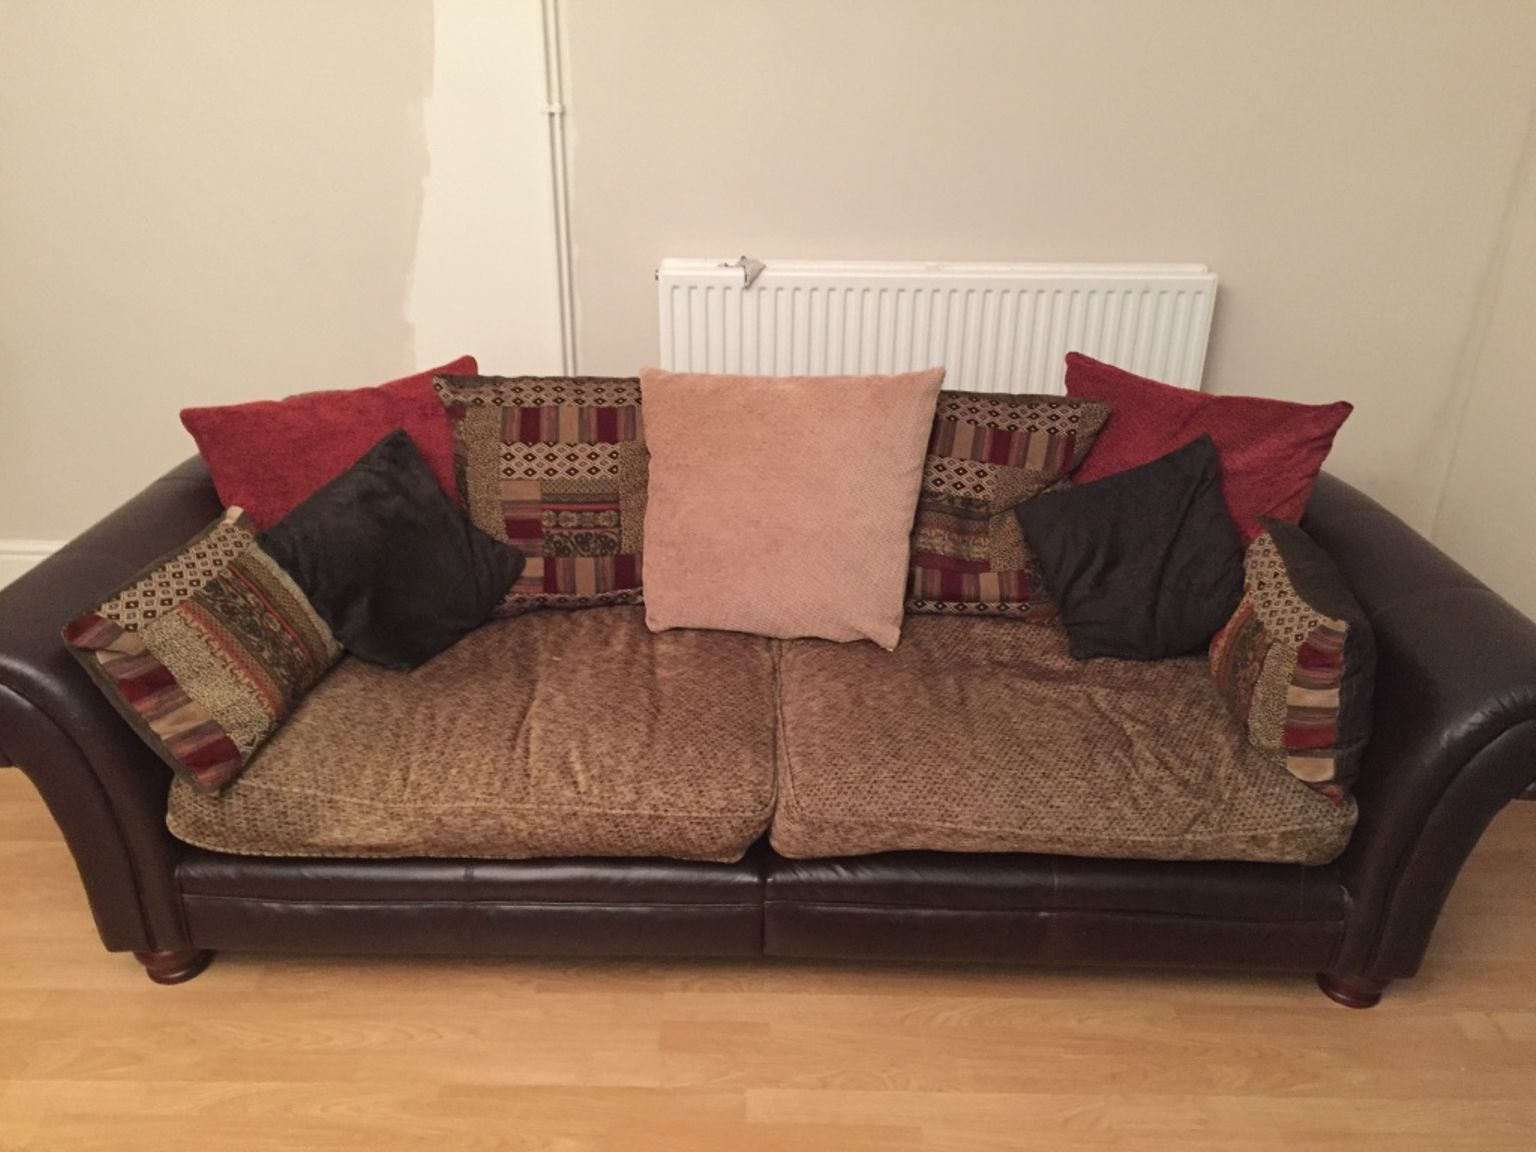 4 seater sofa bed dfs